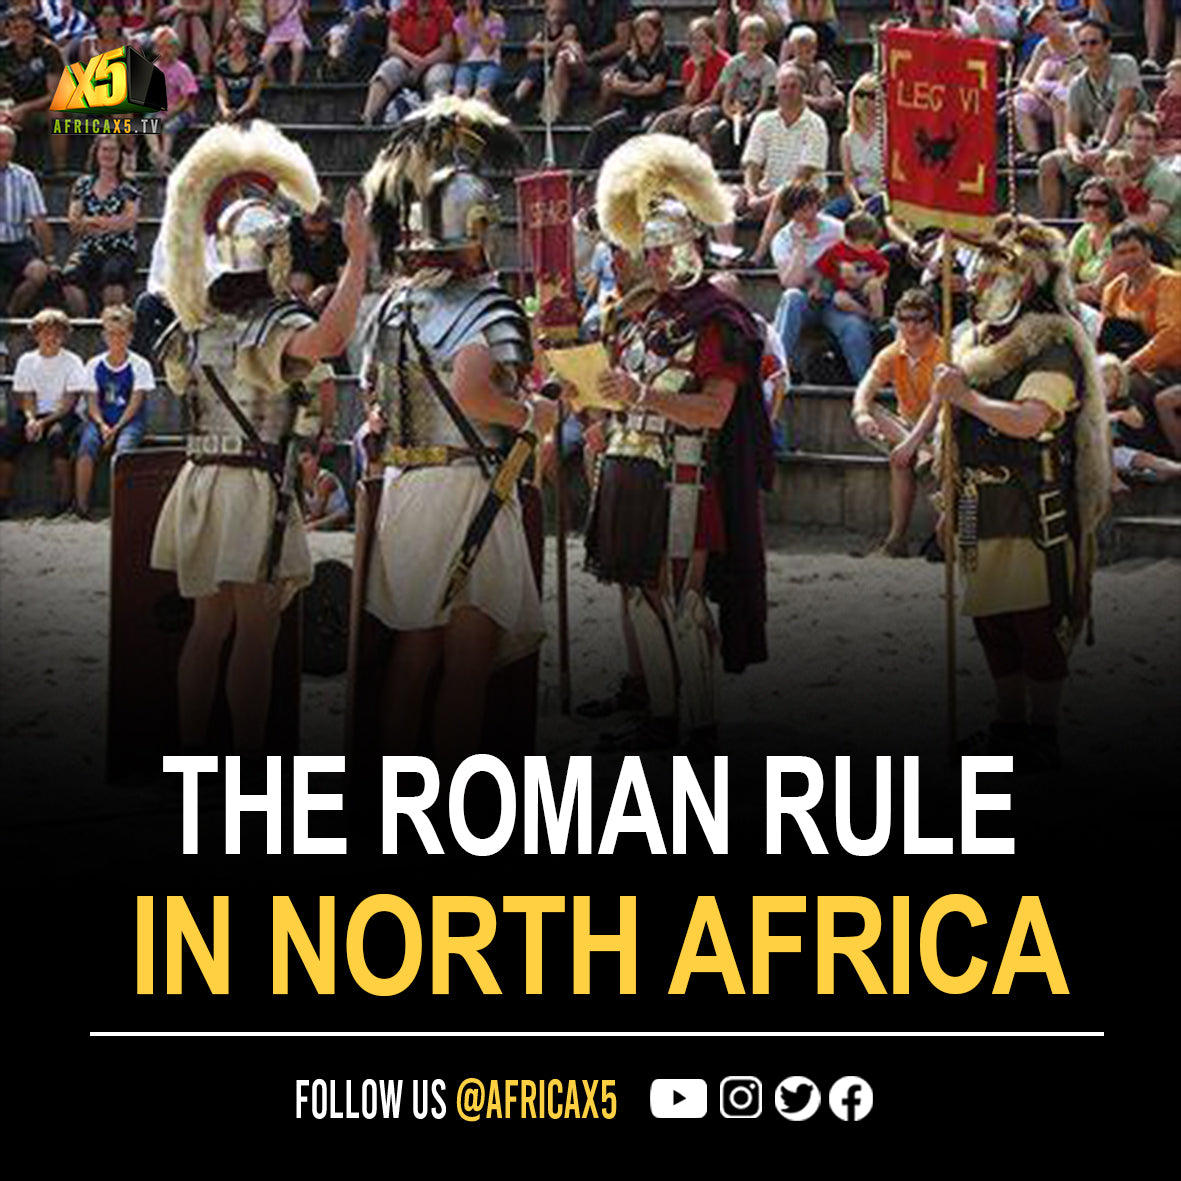 In the sixth and seventh centuries A.D., Roman rule began to lose its hold on North Africa and the Middle East.